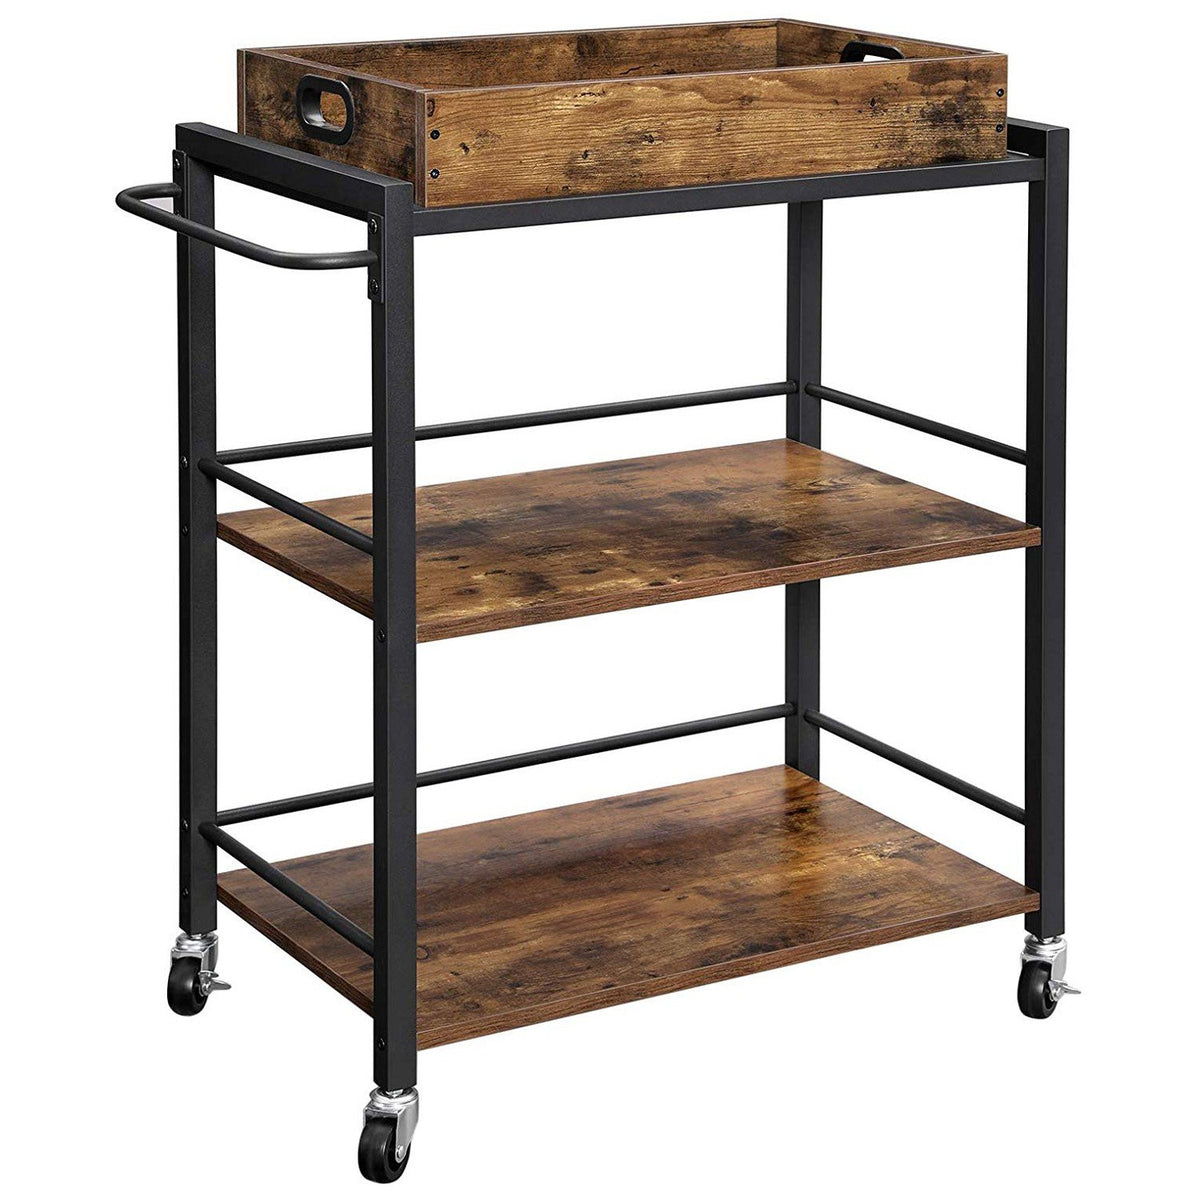 Tray Top Wooden Kitchen Cart with 2 Shelves and Casters, Brown and Black - BM217112